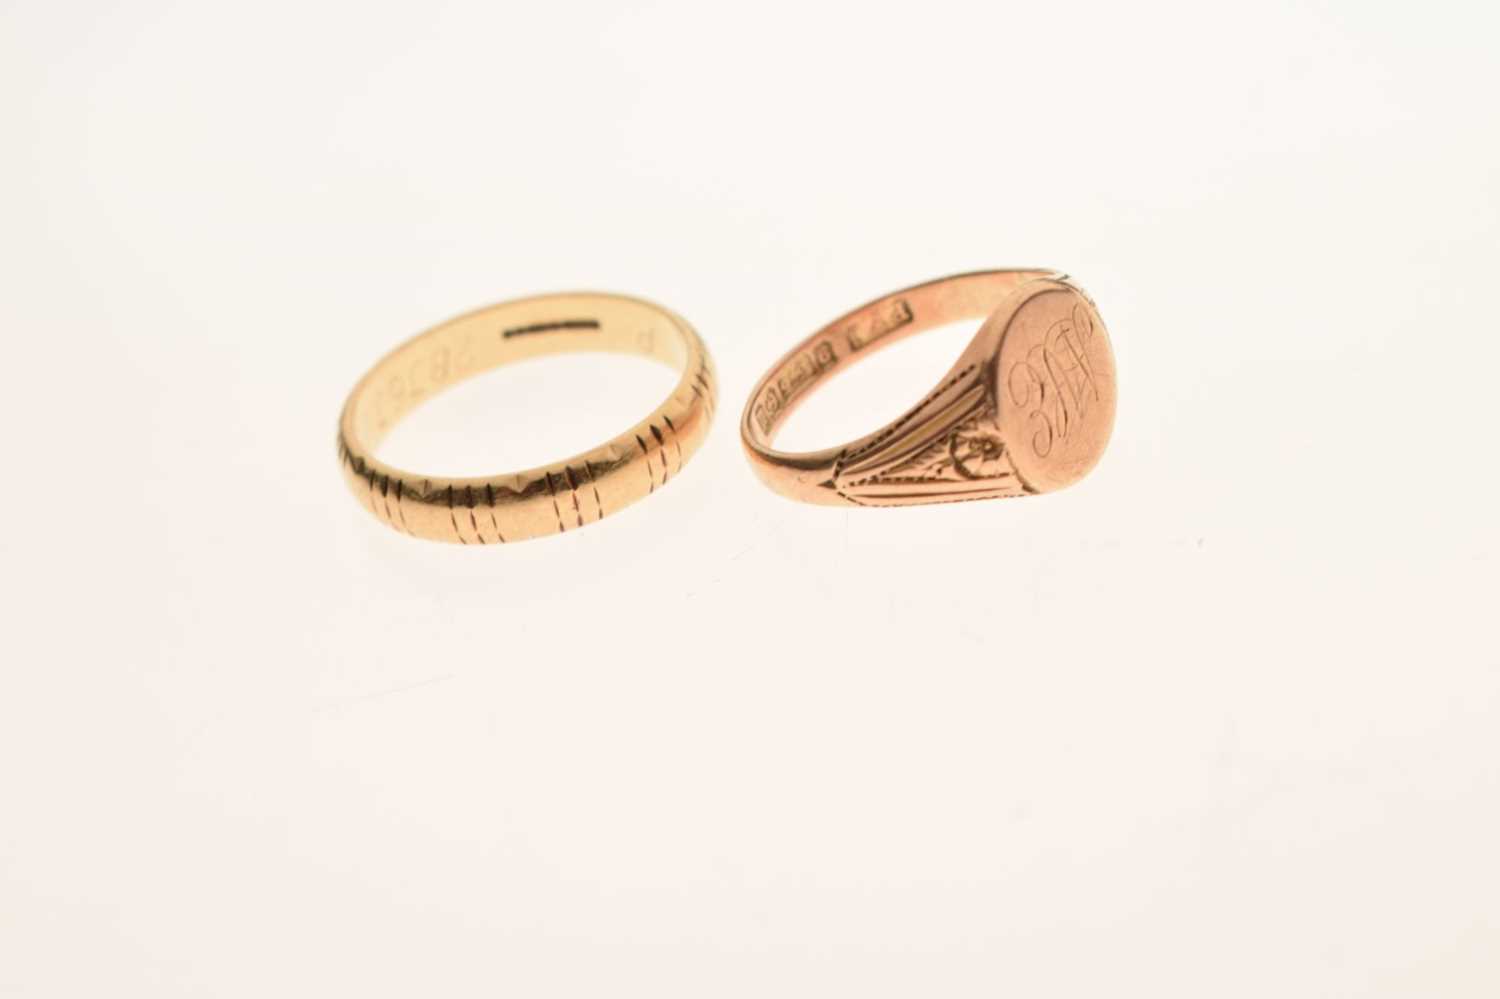 Early 20th century 9ct gold signet ring, and 9ct gold wedding band - Image 5 of 6